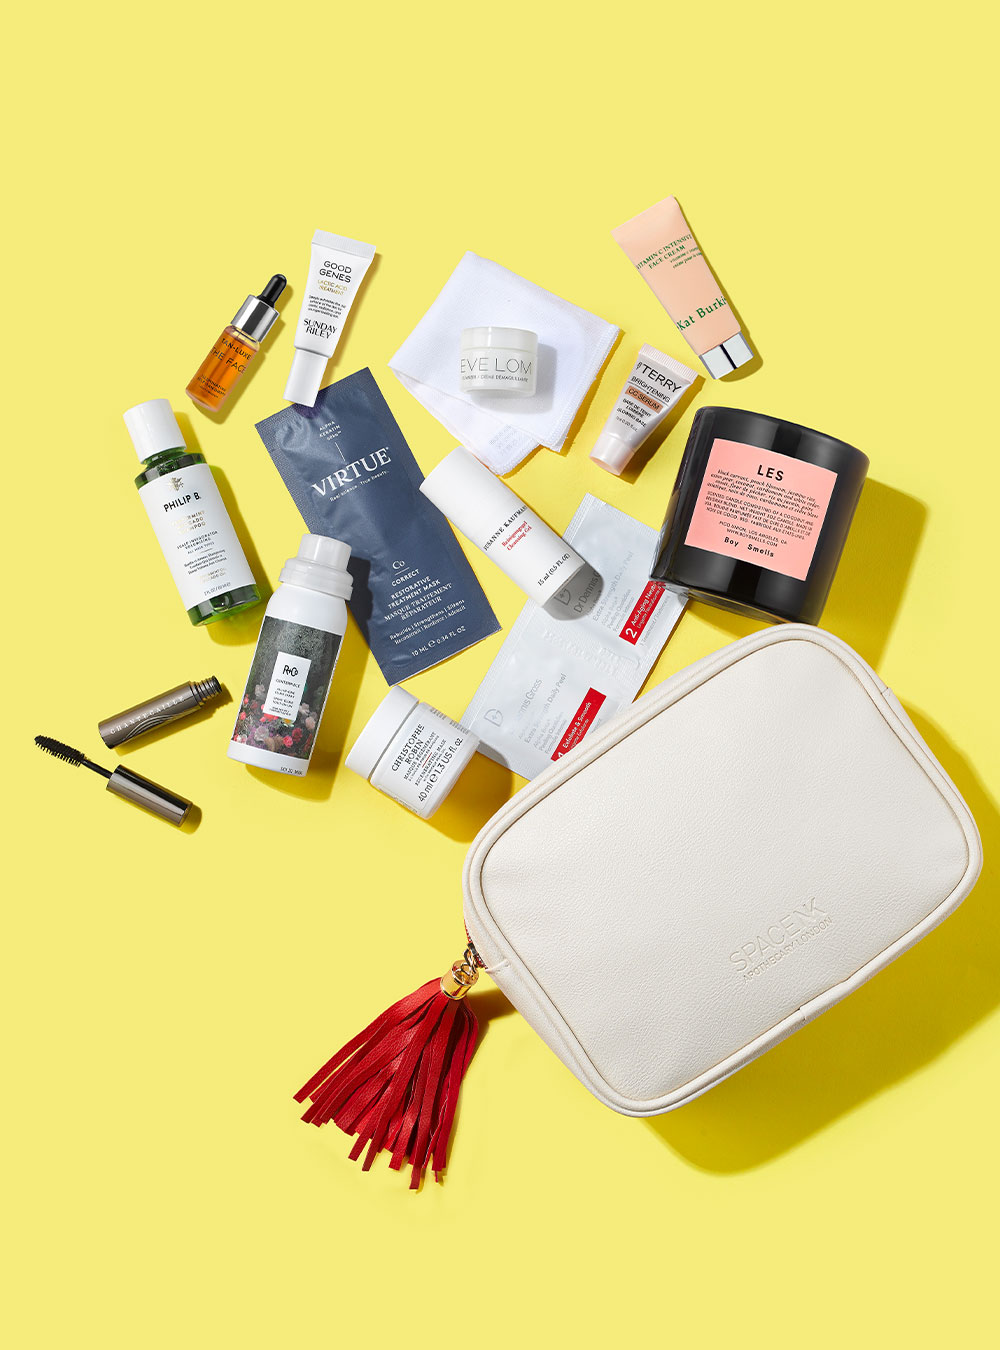 Various Hudson's Bay beauty products are spread out on a light yellow background.